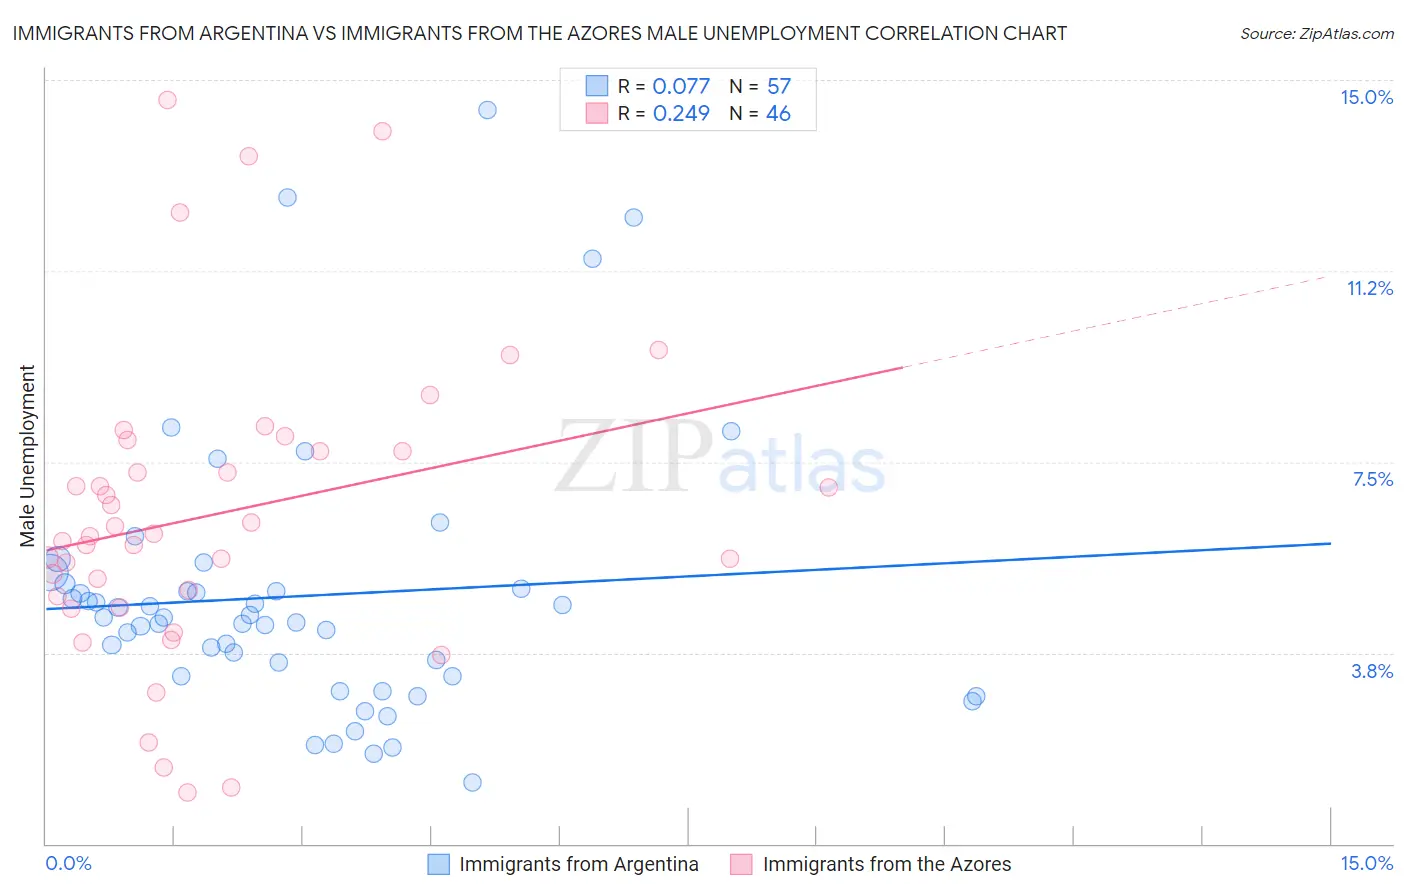 Immigrants from Argentina vs Immigrants from the Azores Male Unemployment